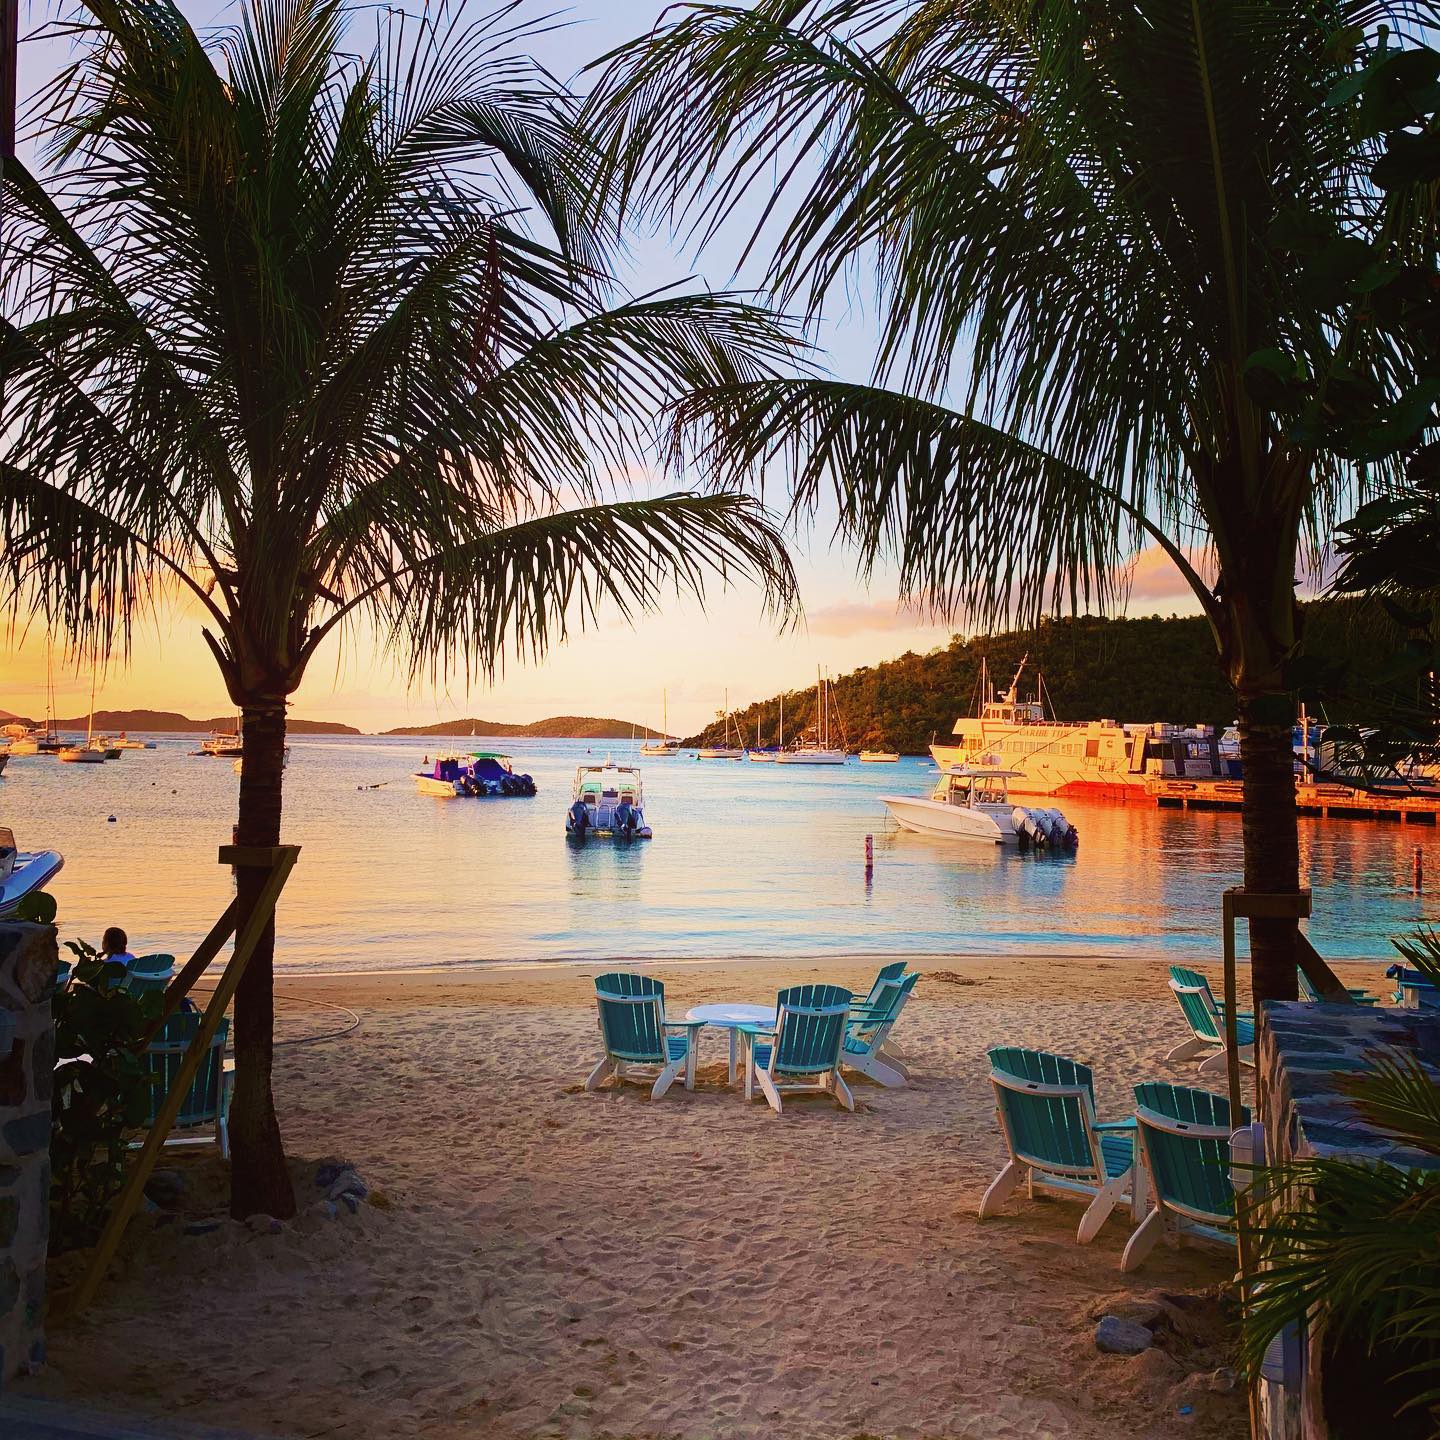 Cruz Bay | a Hot Spot for Restaurants, Shopping, Wine, and Culture